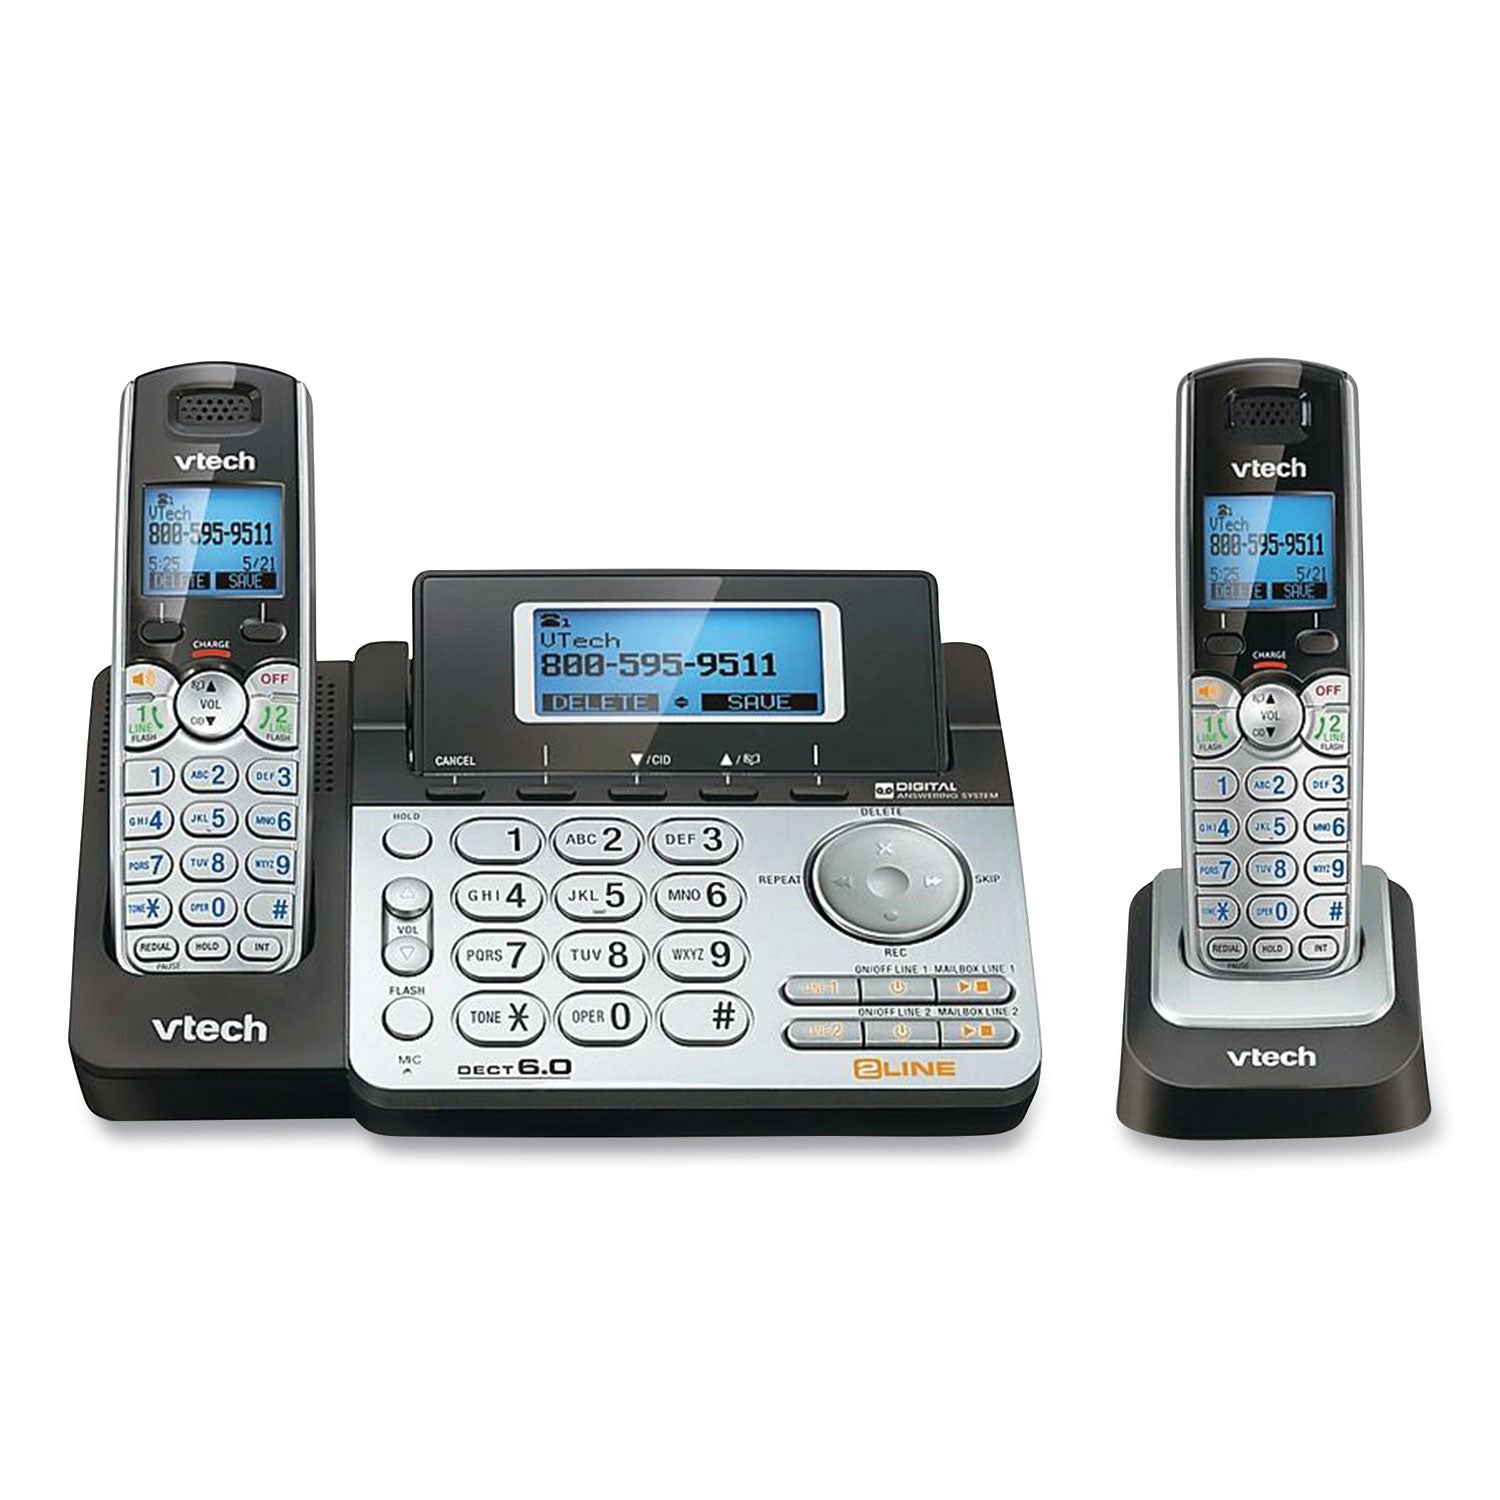 ds6151-2-two-handset-two-line-cordless-phone-with-answering-system-black-silver_vte80088300 - 1